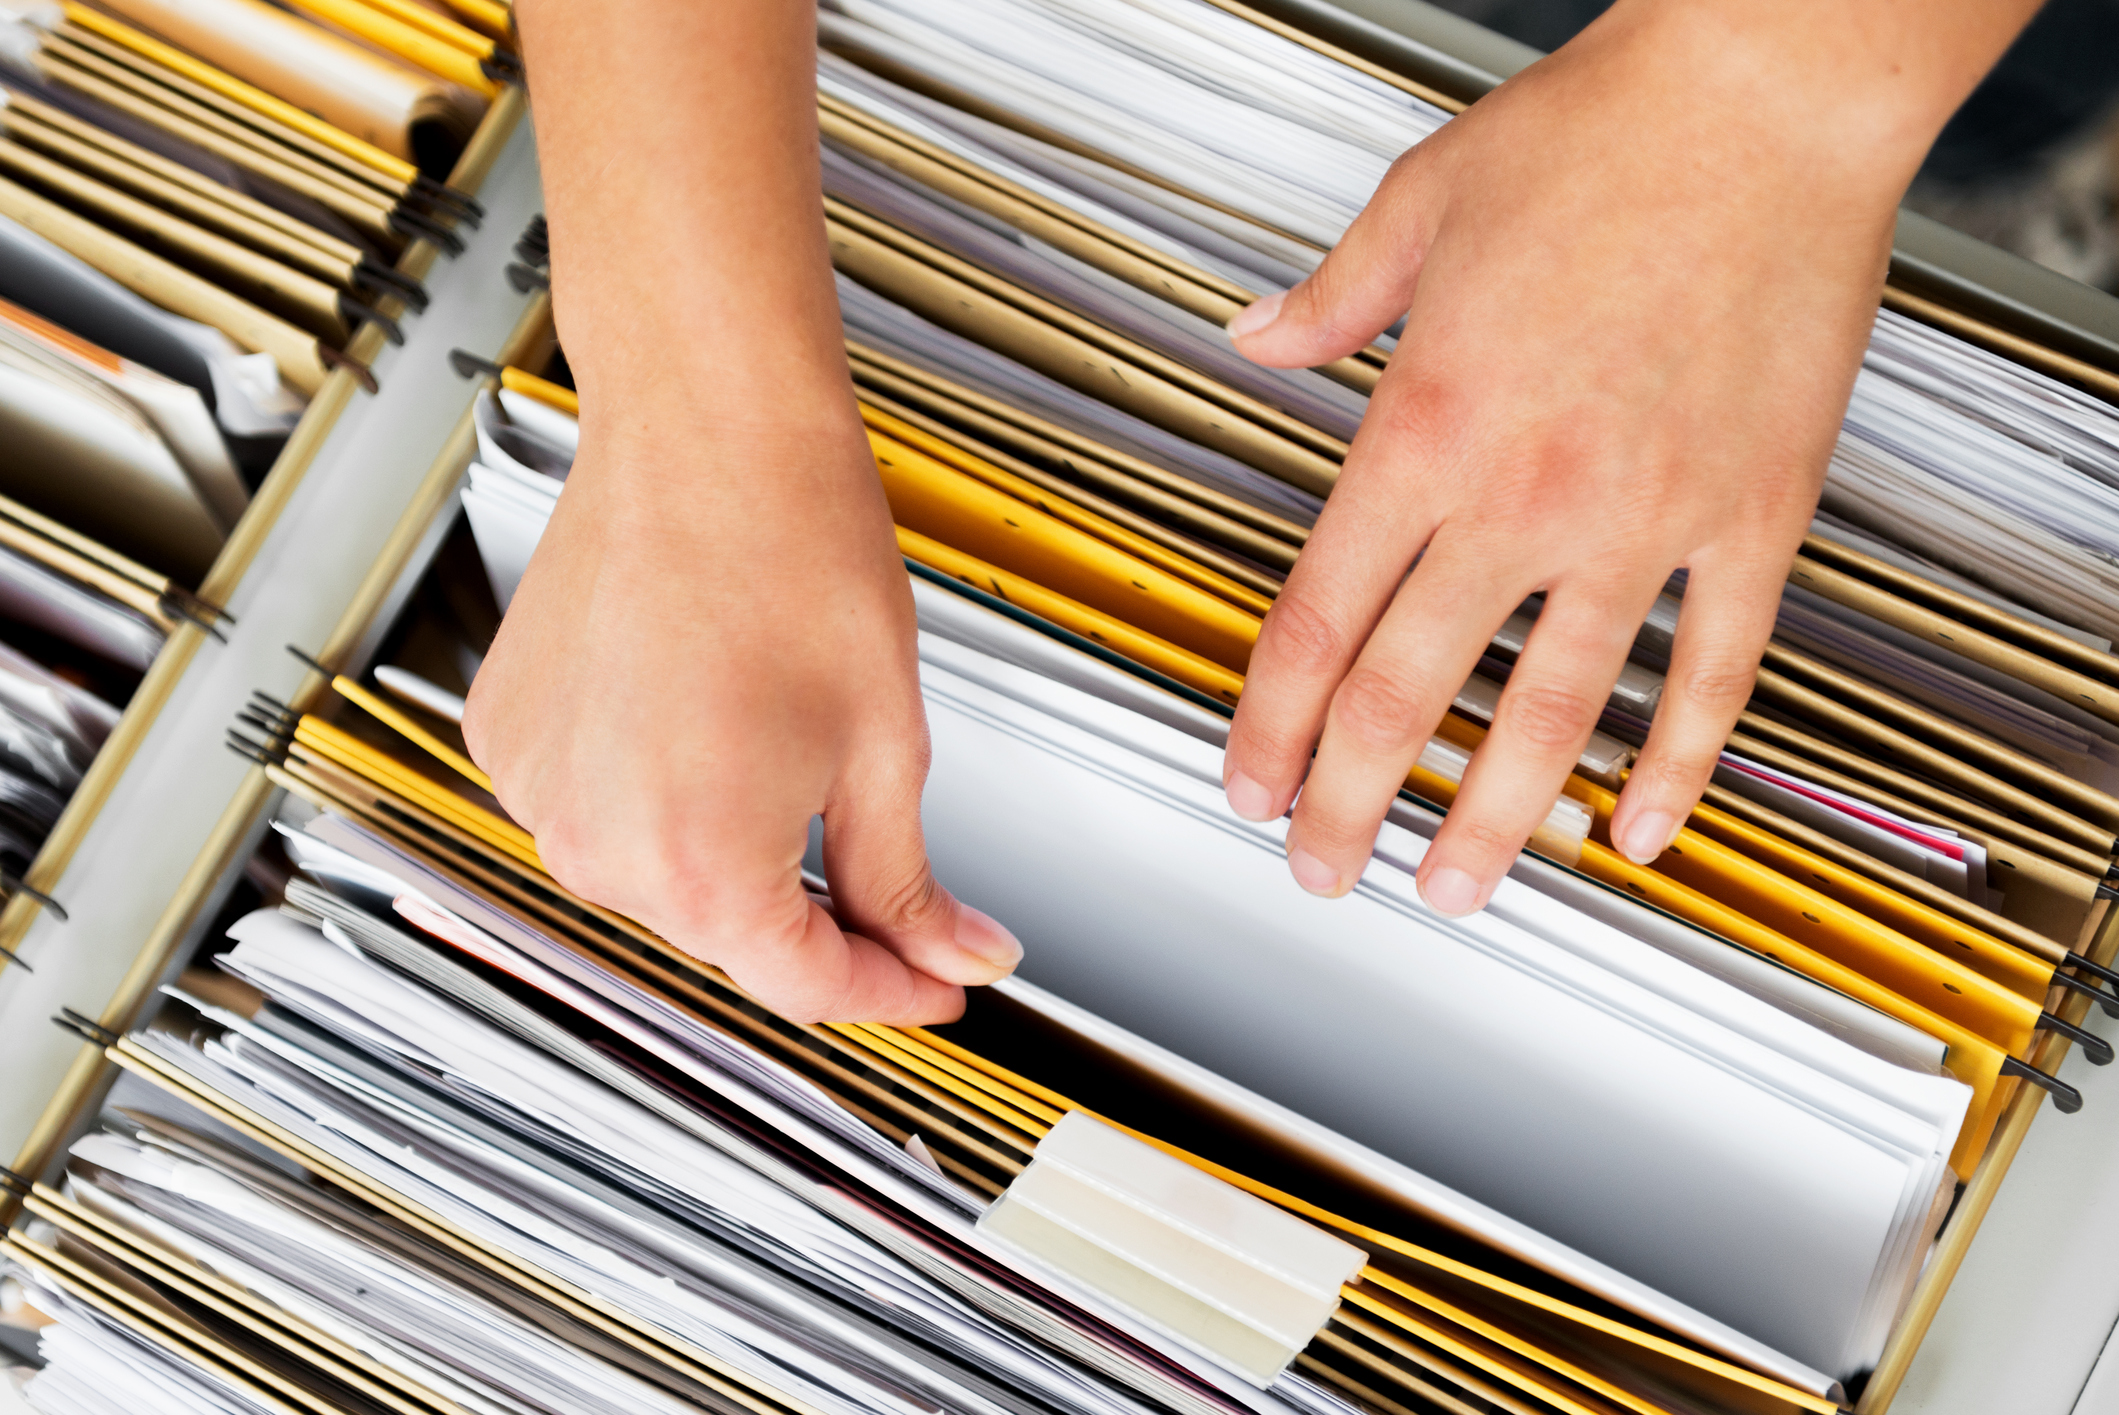 Lightening The Load – By Getting Rid of Old Documents